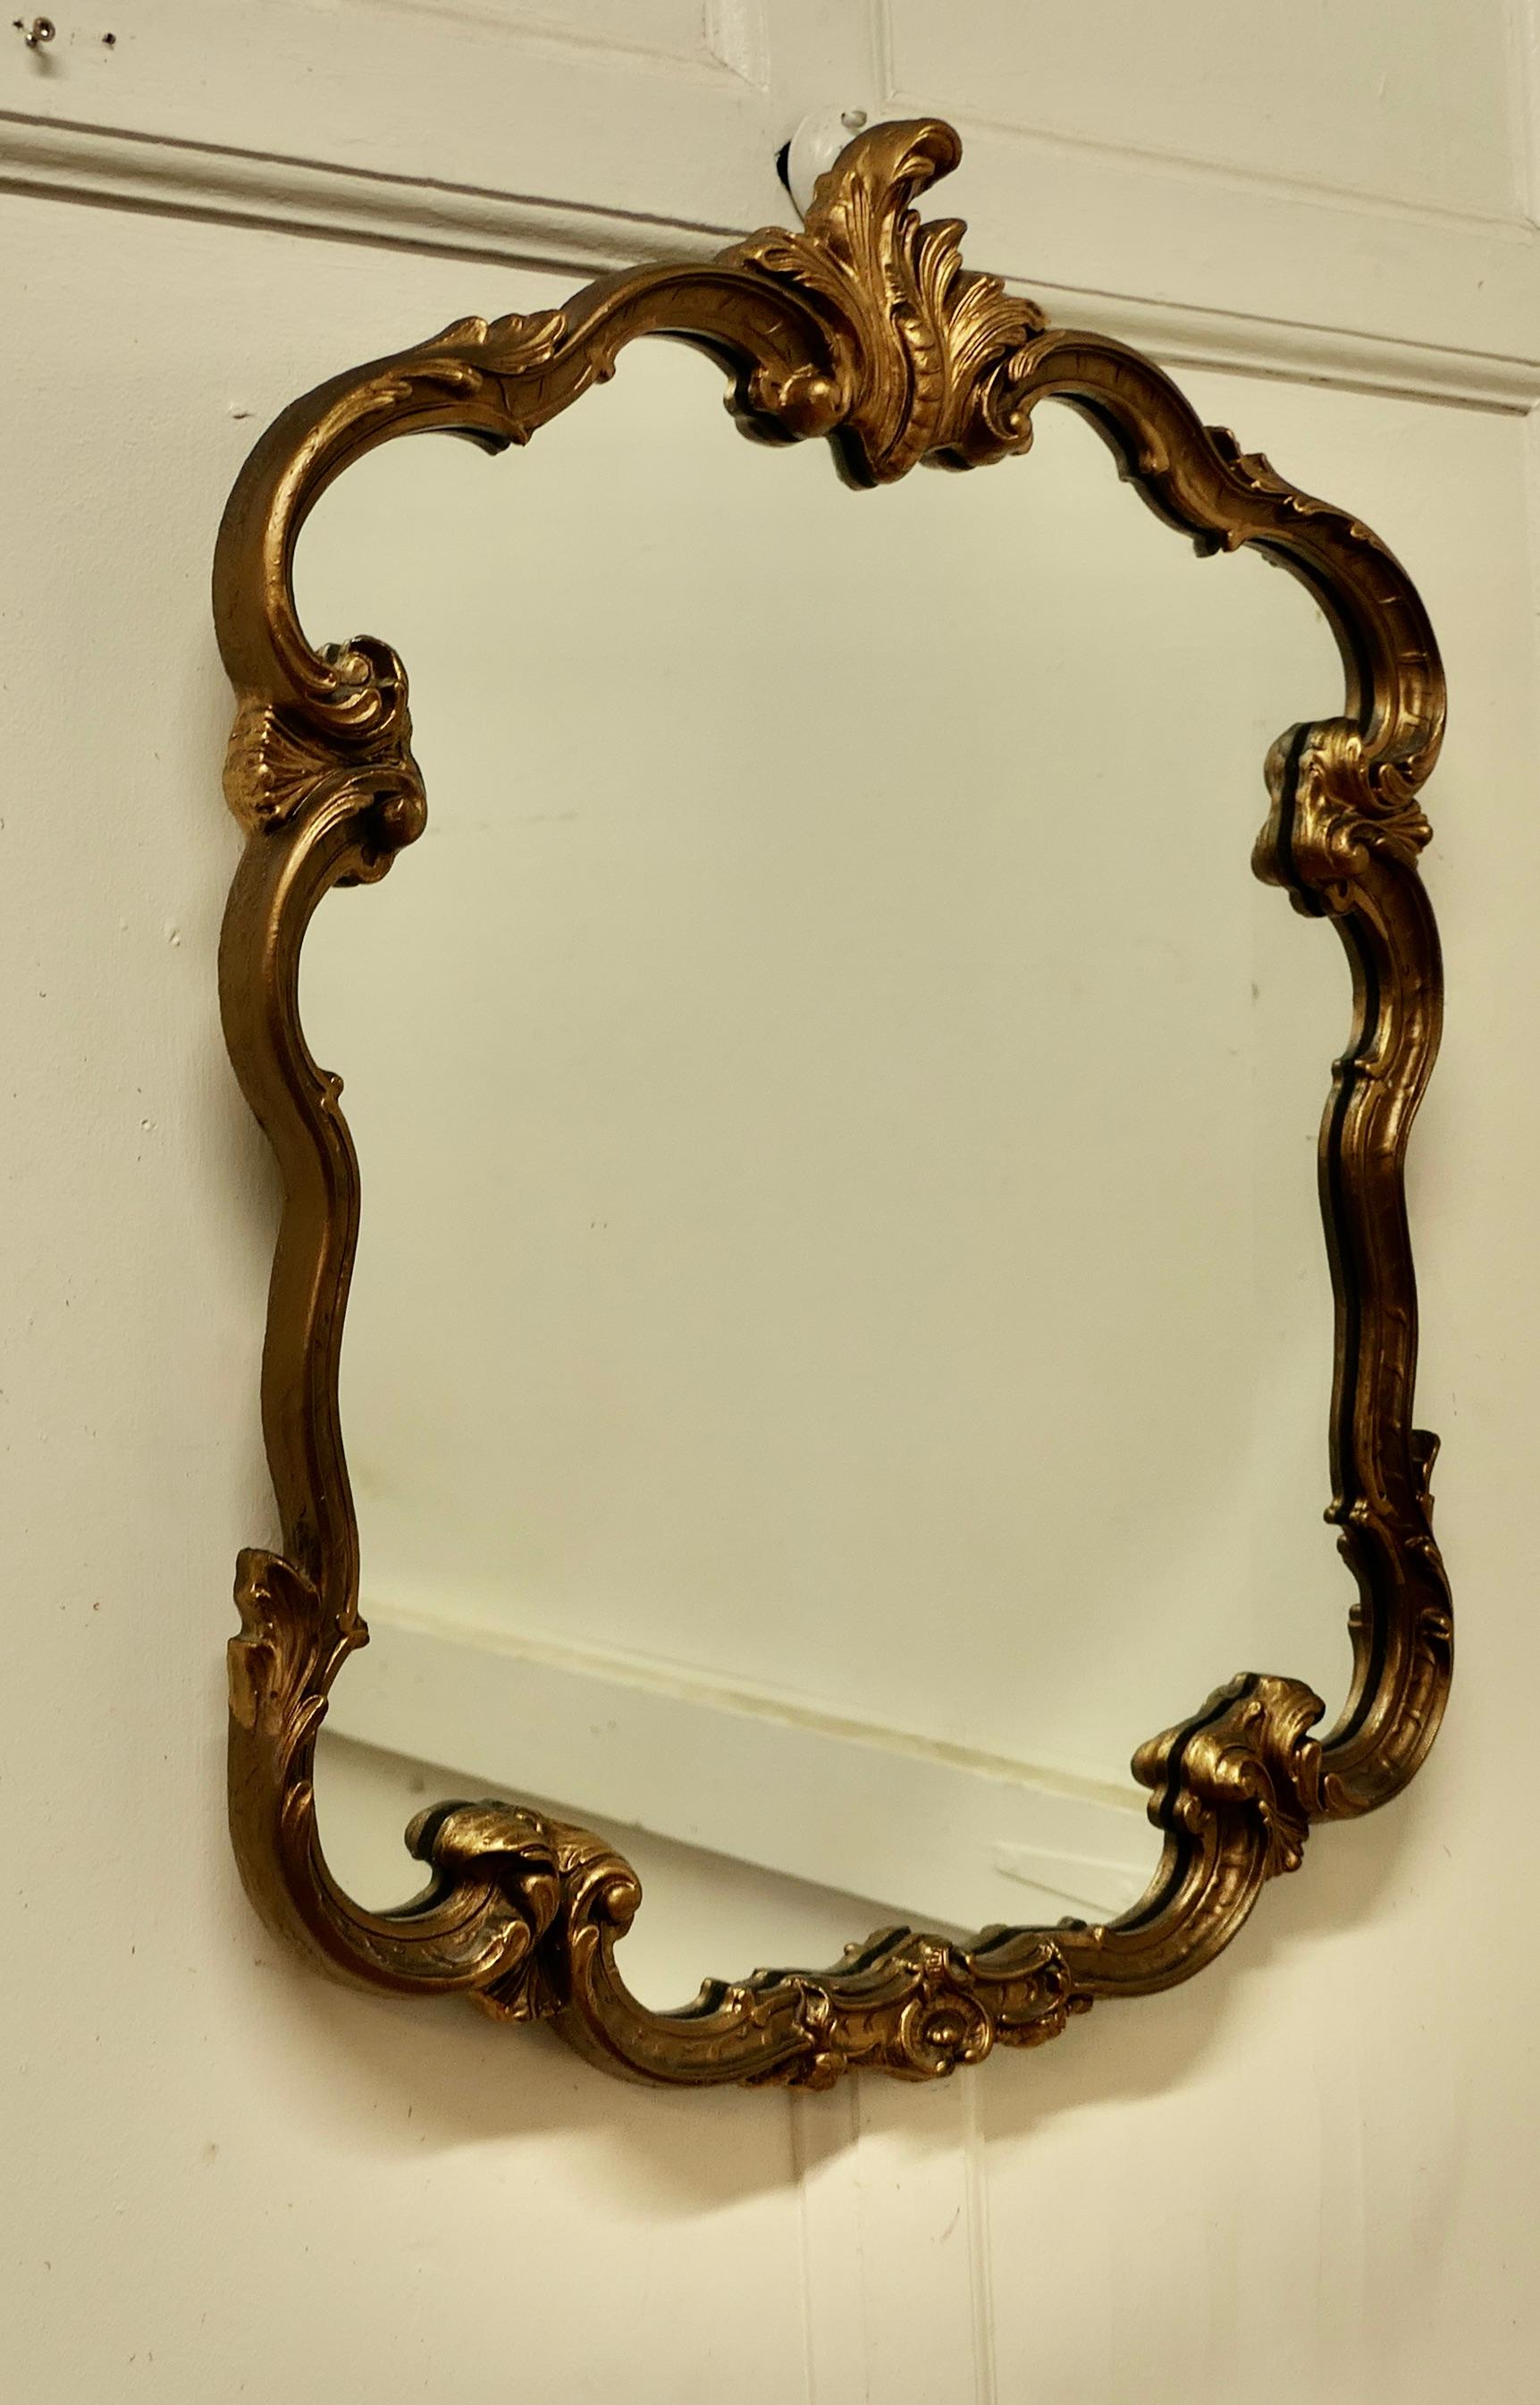 Large Atsonea Rococo style gilt wall mirror

The Mirror has a decorative Rococo gilt frame set with acanthus leaves in an unusual shape to surround the glass mirror
The mirror glass is original and in good condition with little or no foxing